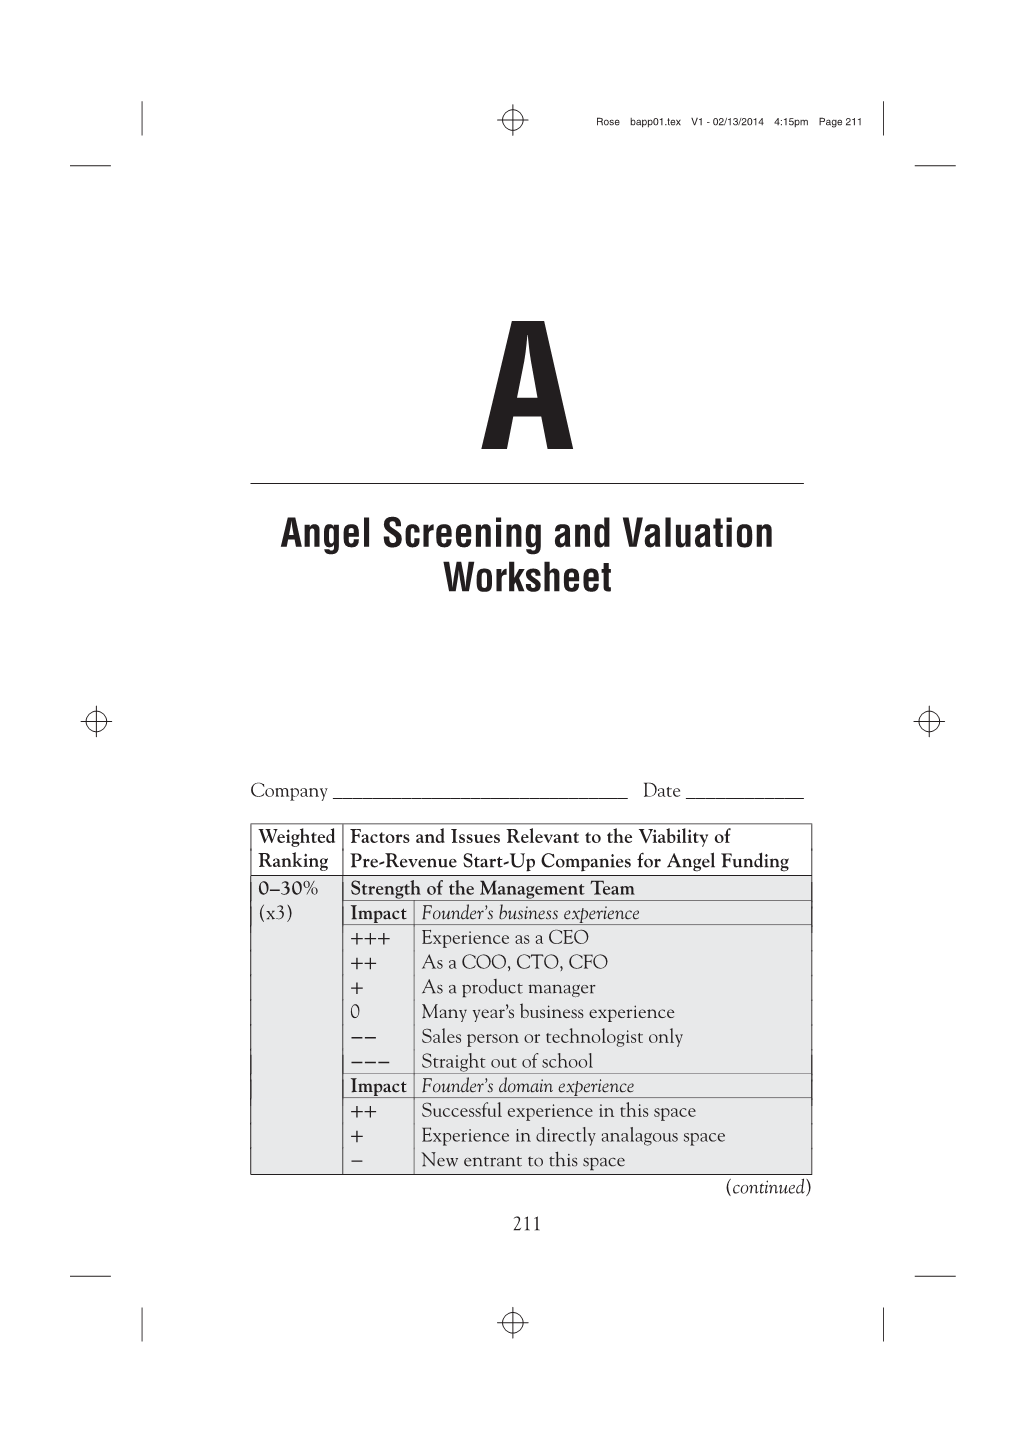 Angel Screening and Valuation Worksheet